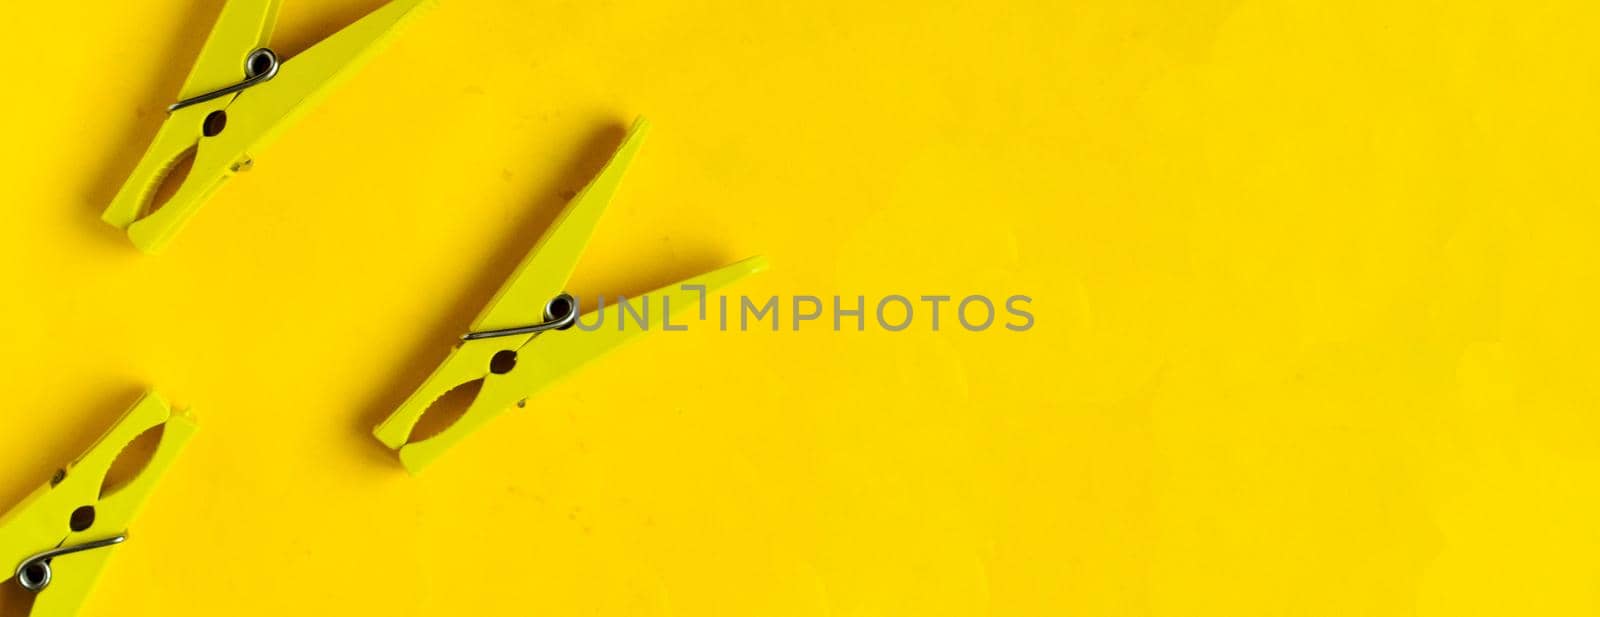 Top view, yellow clothespins on a yellow background, copyspace by andre_dechapelle